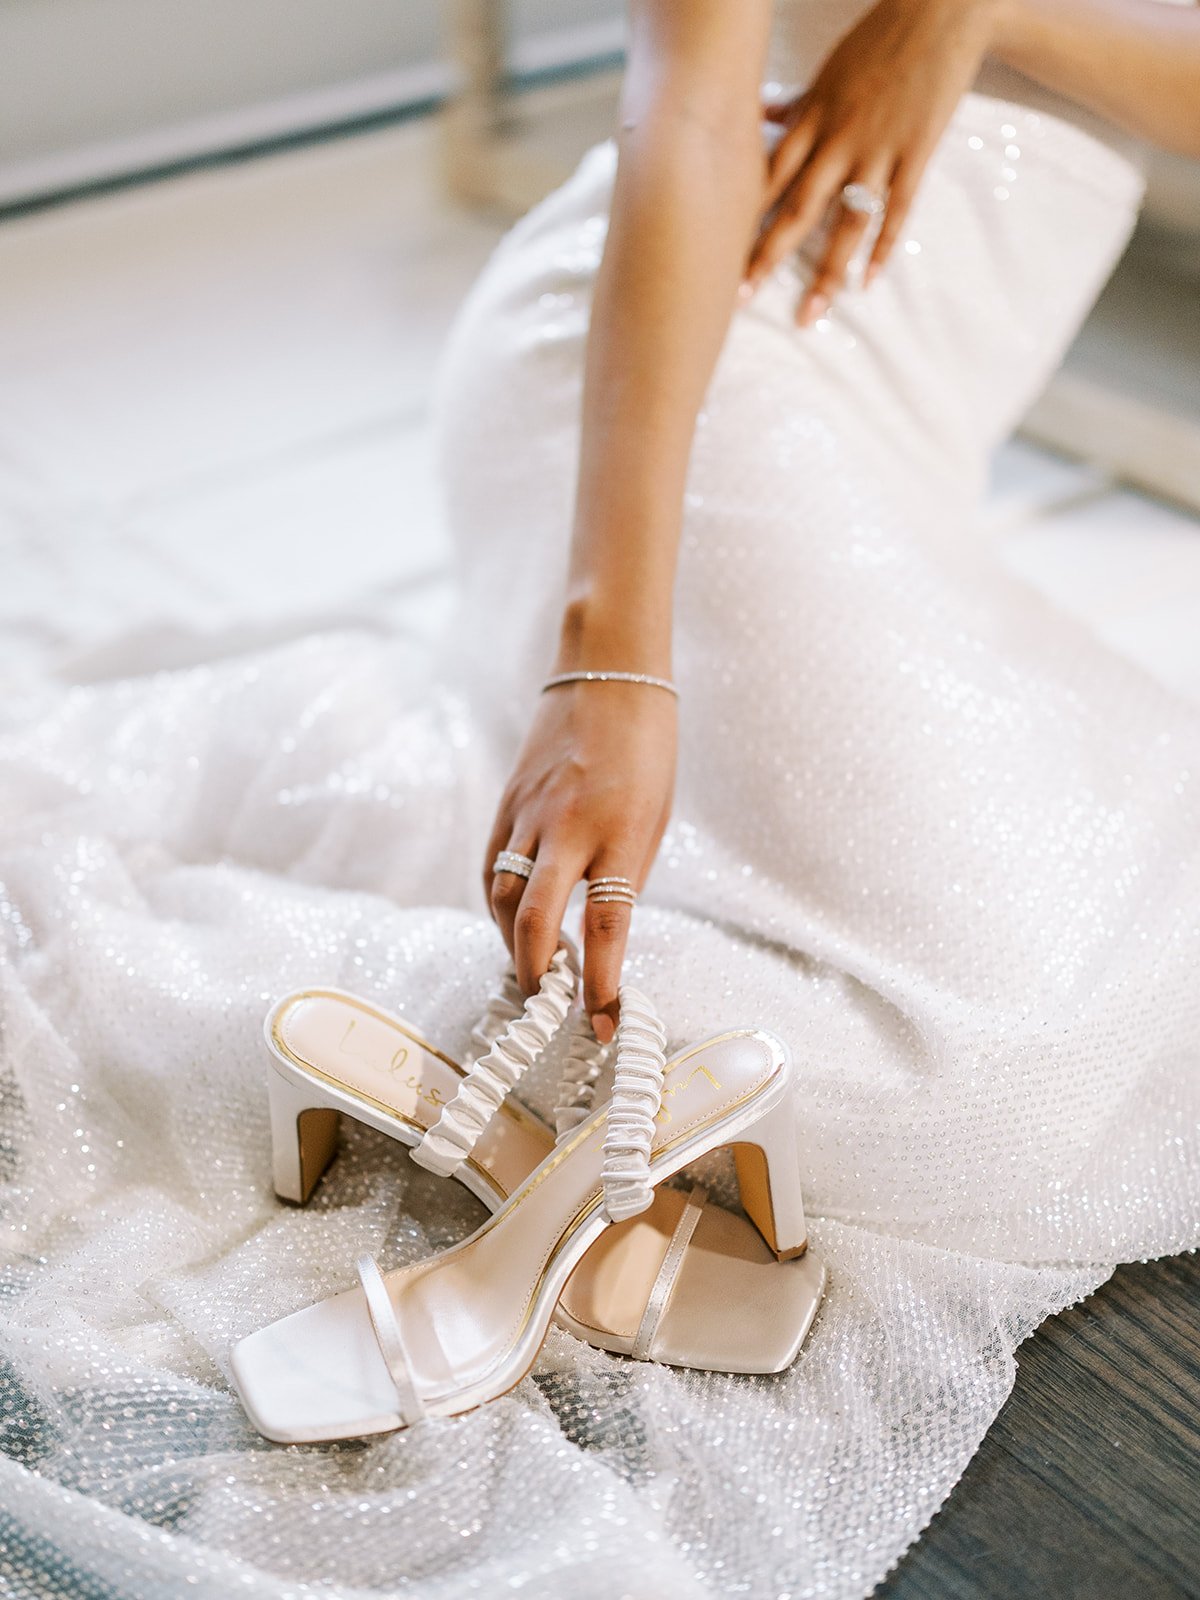 lulu's bridal shoes in a brides of austin styled shoot featuring an alena leena wedding dress.